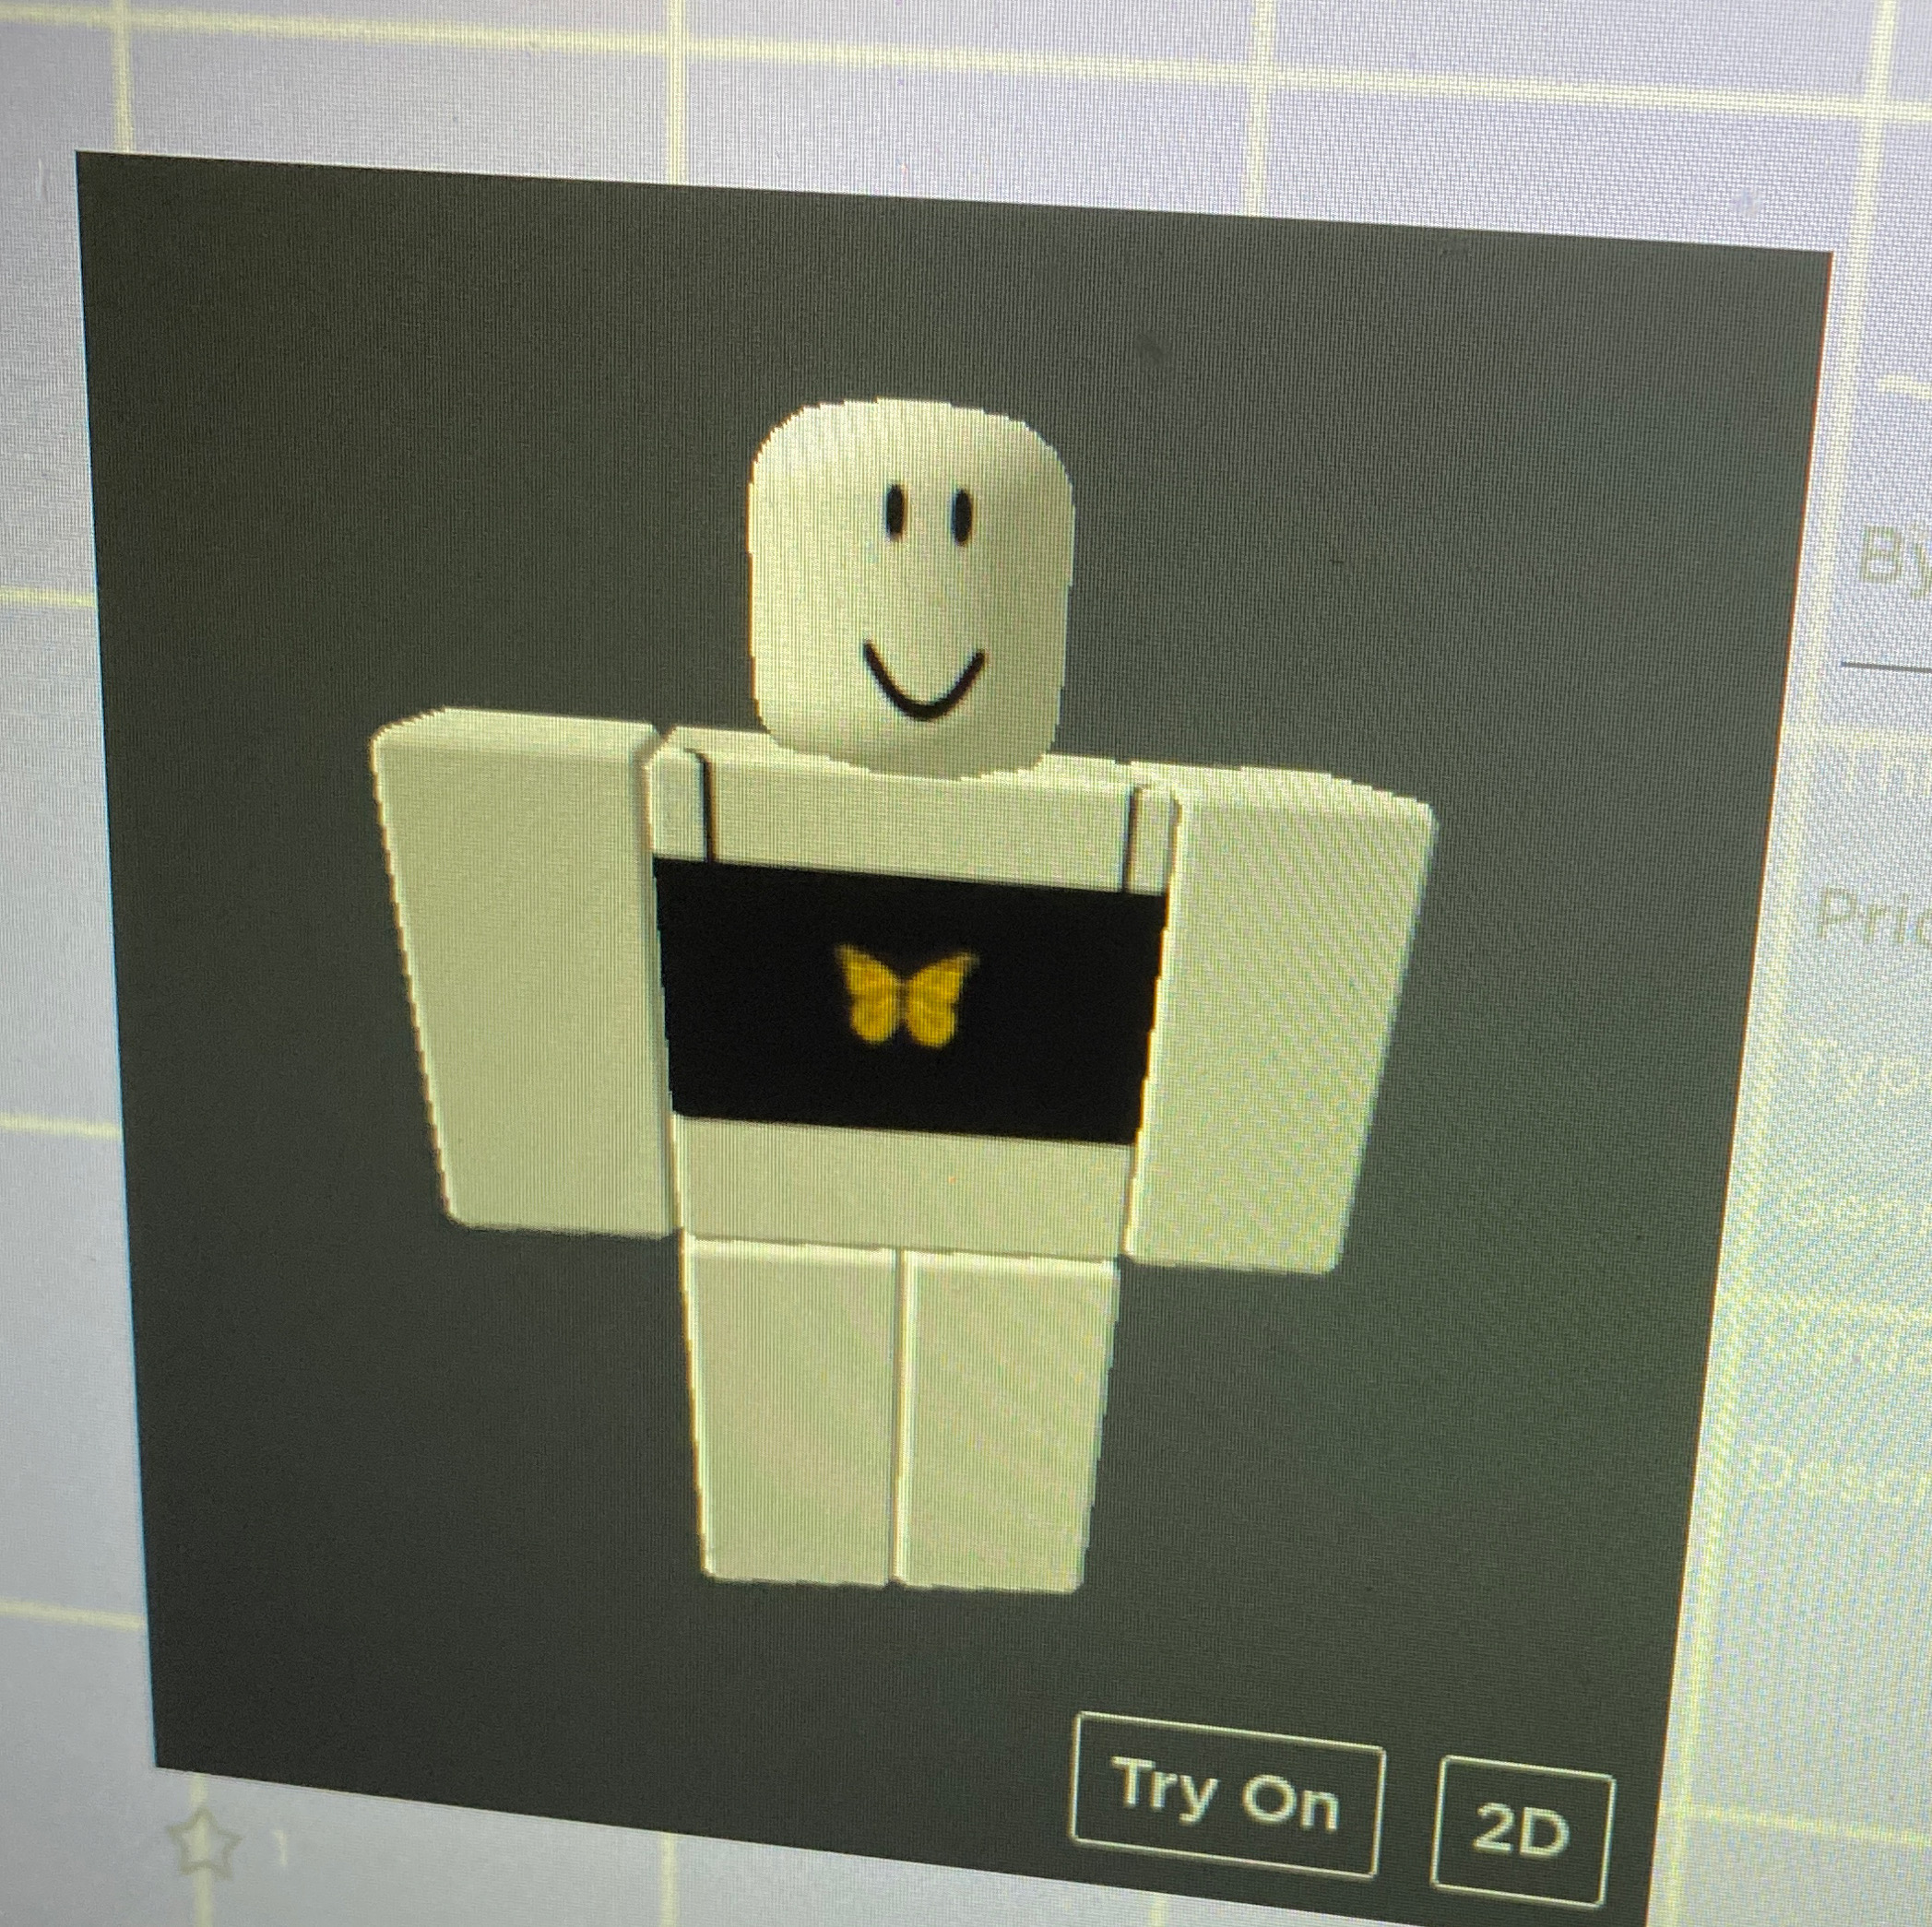 Buy Roblox Clothes For 4 Robux Cheap Online - ilk robux